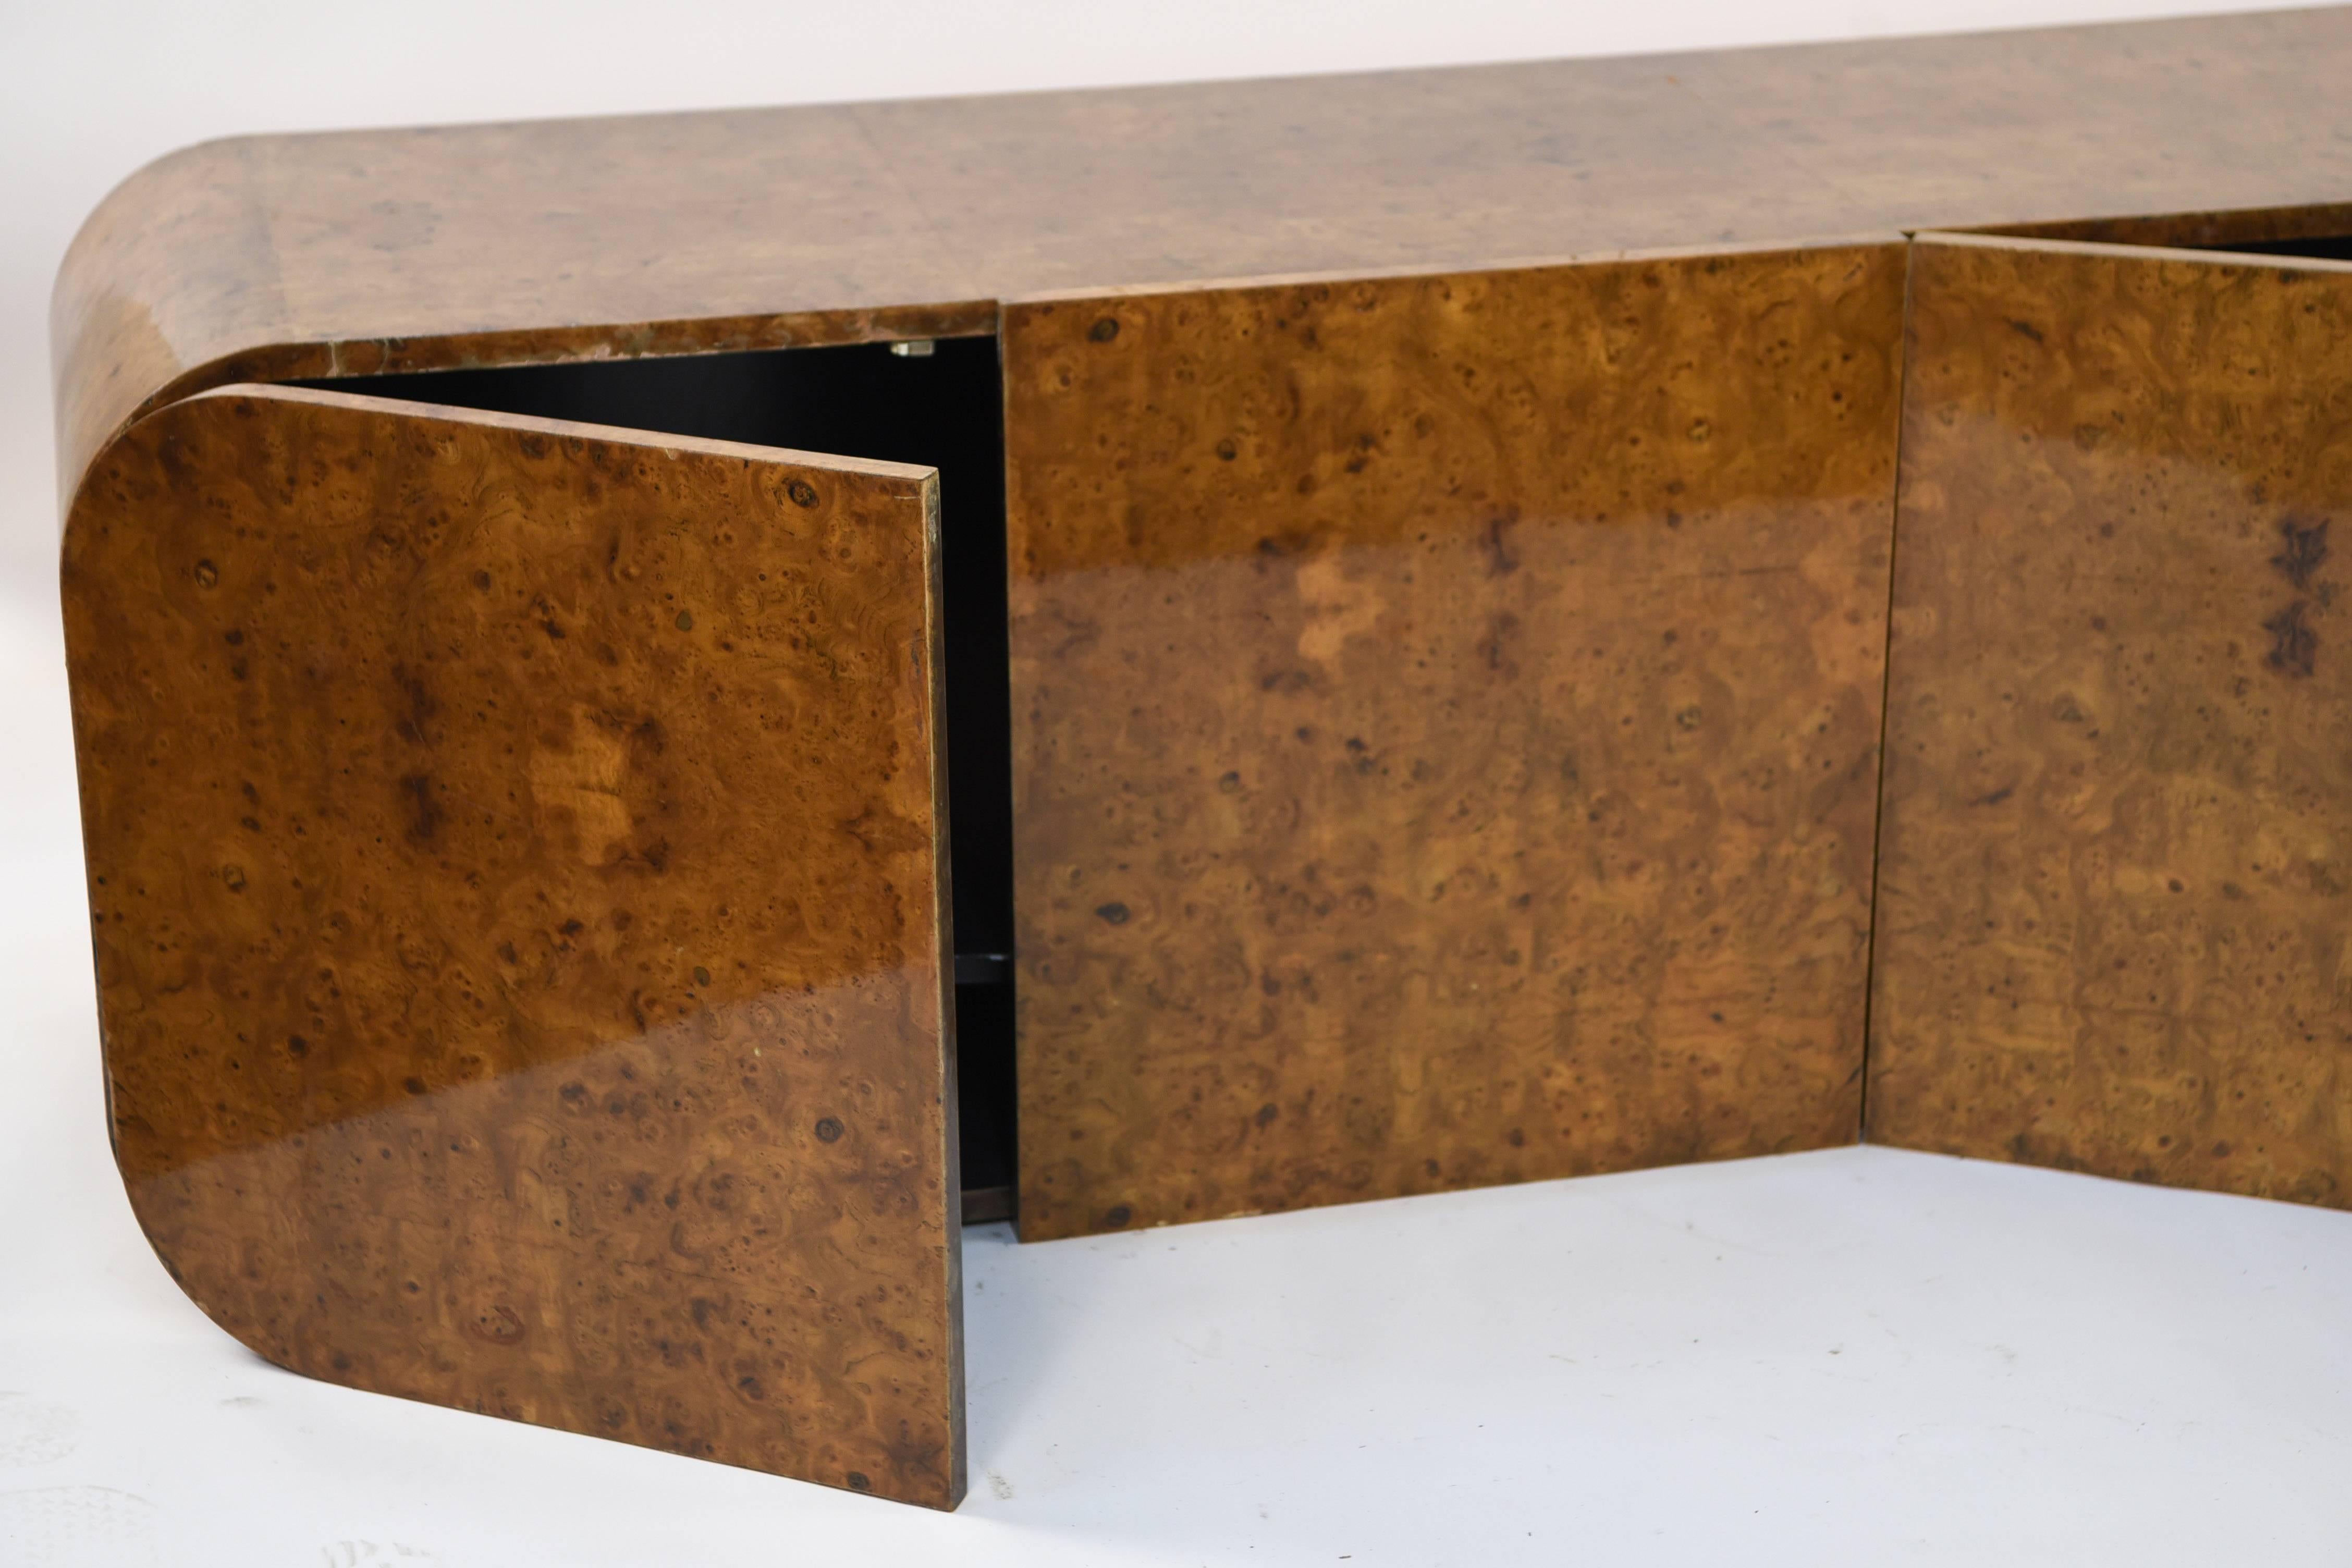 This sideboard or credenza is meant to be wall-mounted to give a modern, floating illusion. Made by Pace Furniture Collection, circa 1970s, in a gorgeous burl wood. The curved corners give this piece a sleek appearance.